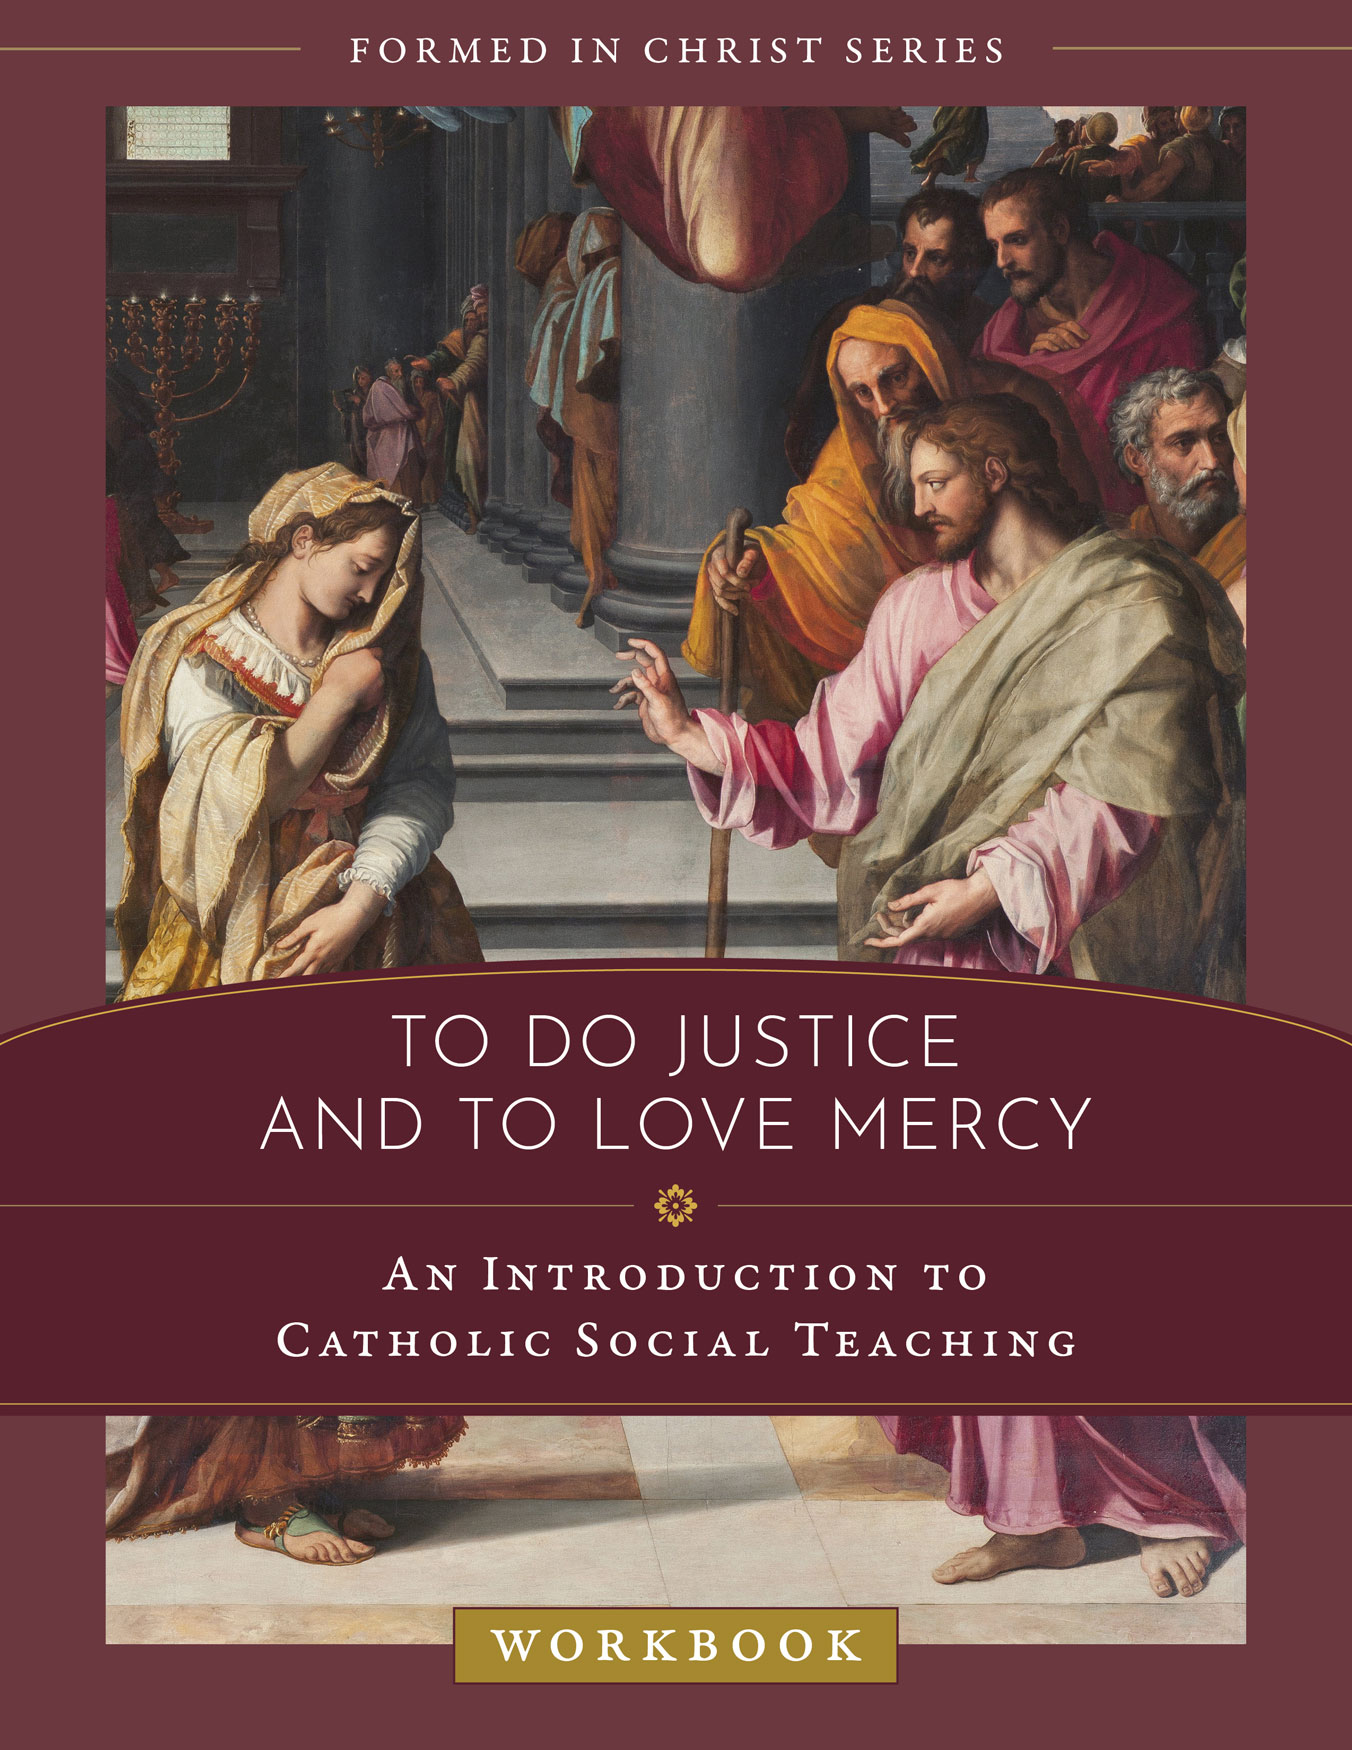 Formed in Christ To Do Justice and to Love Mercy Workbook / Christina Dehan Jaloway & Emily Stimpson Chapman